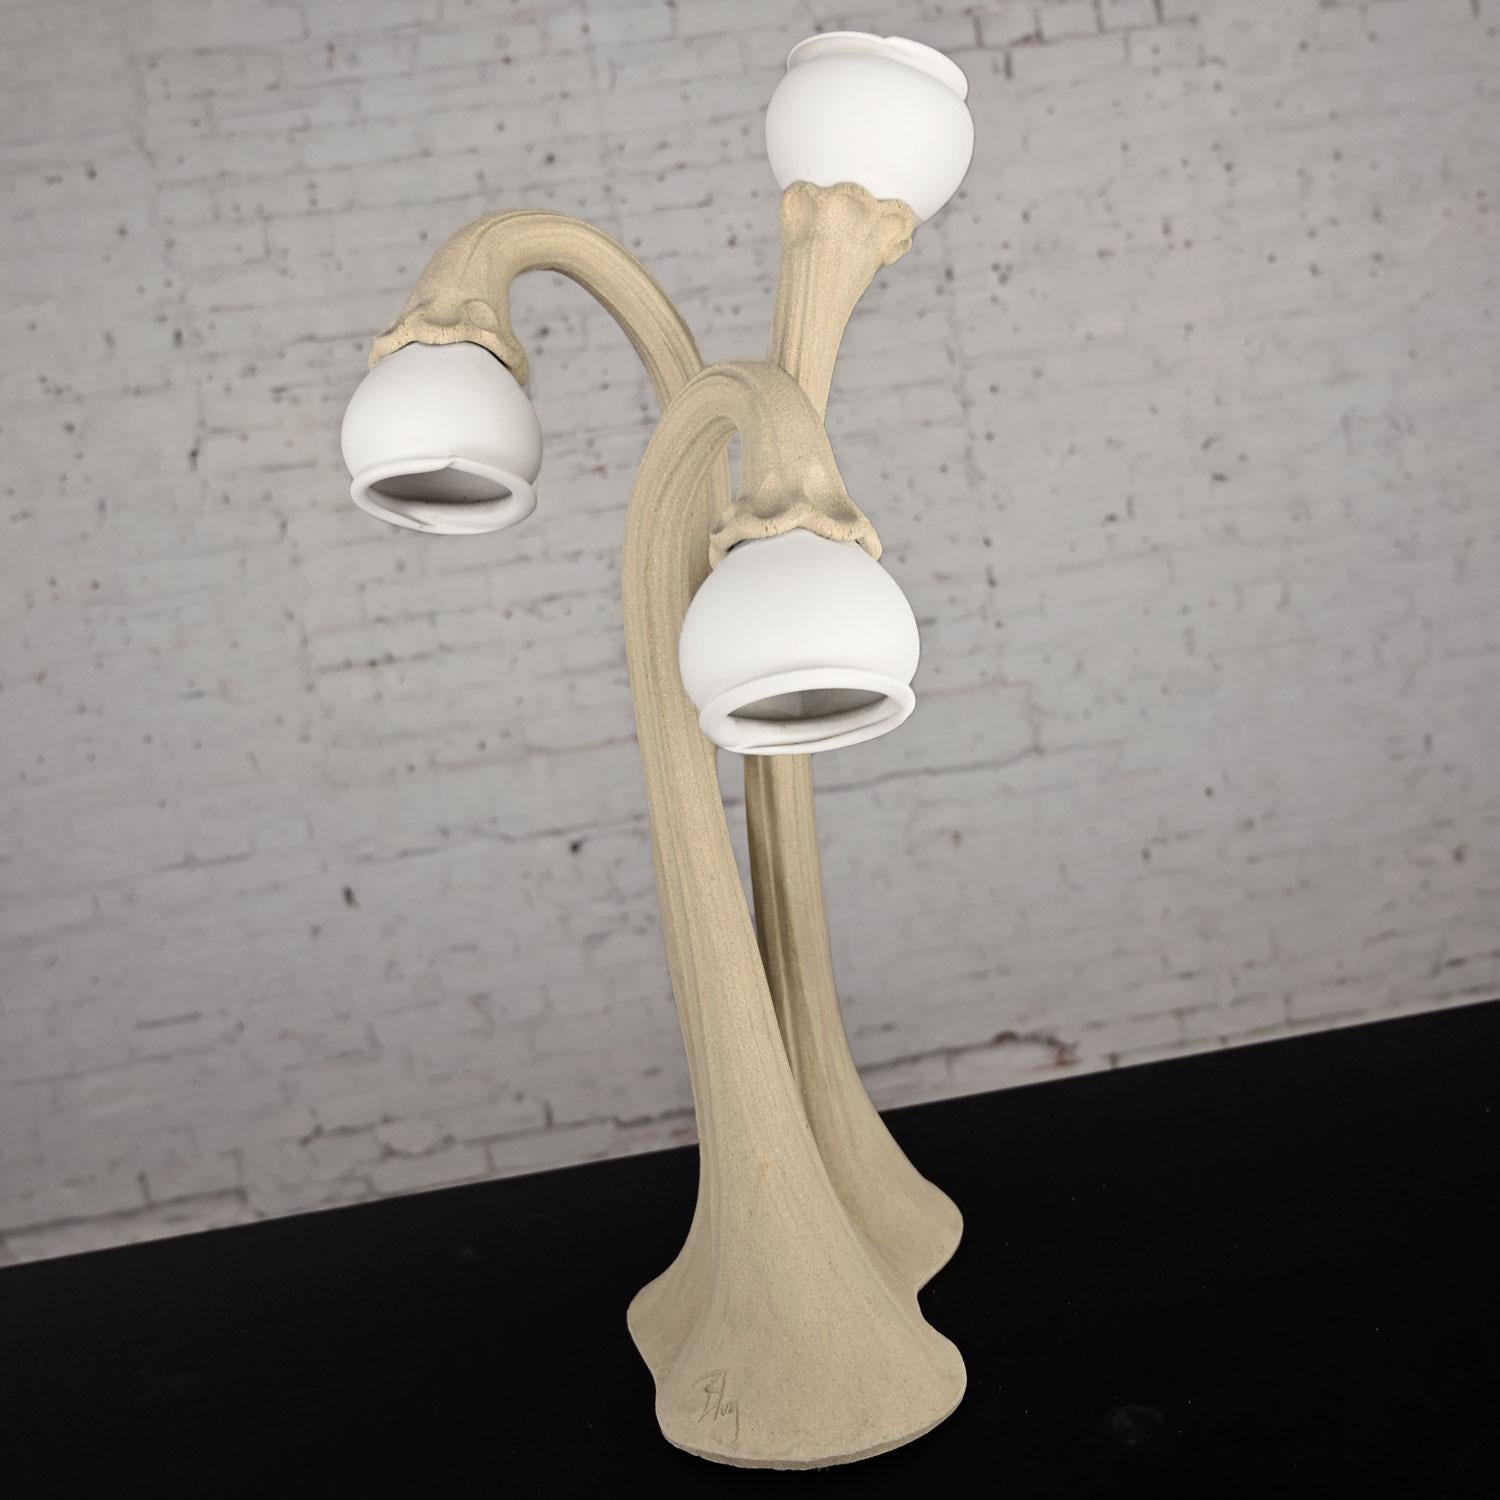 20th Century Postmodern or Art Nouveau Style Calla Lily Stoneware Table Lamp by Doug Blum